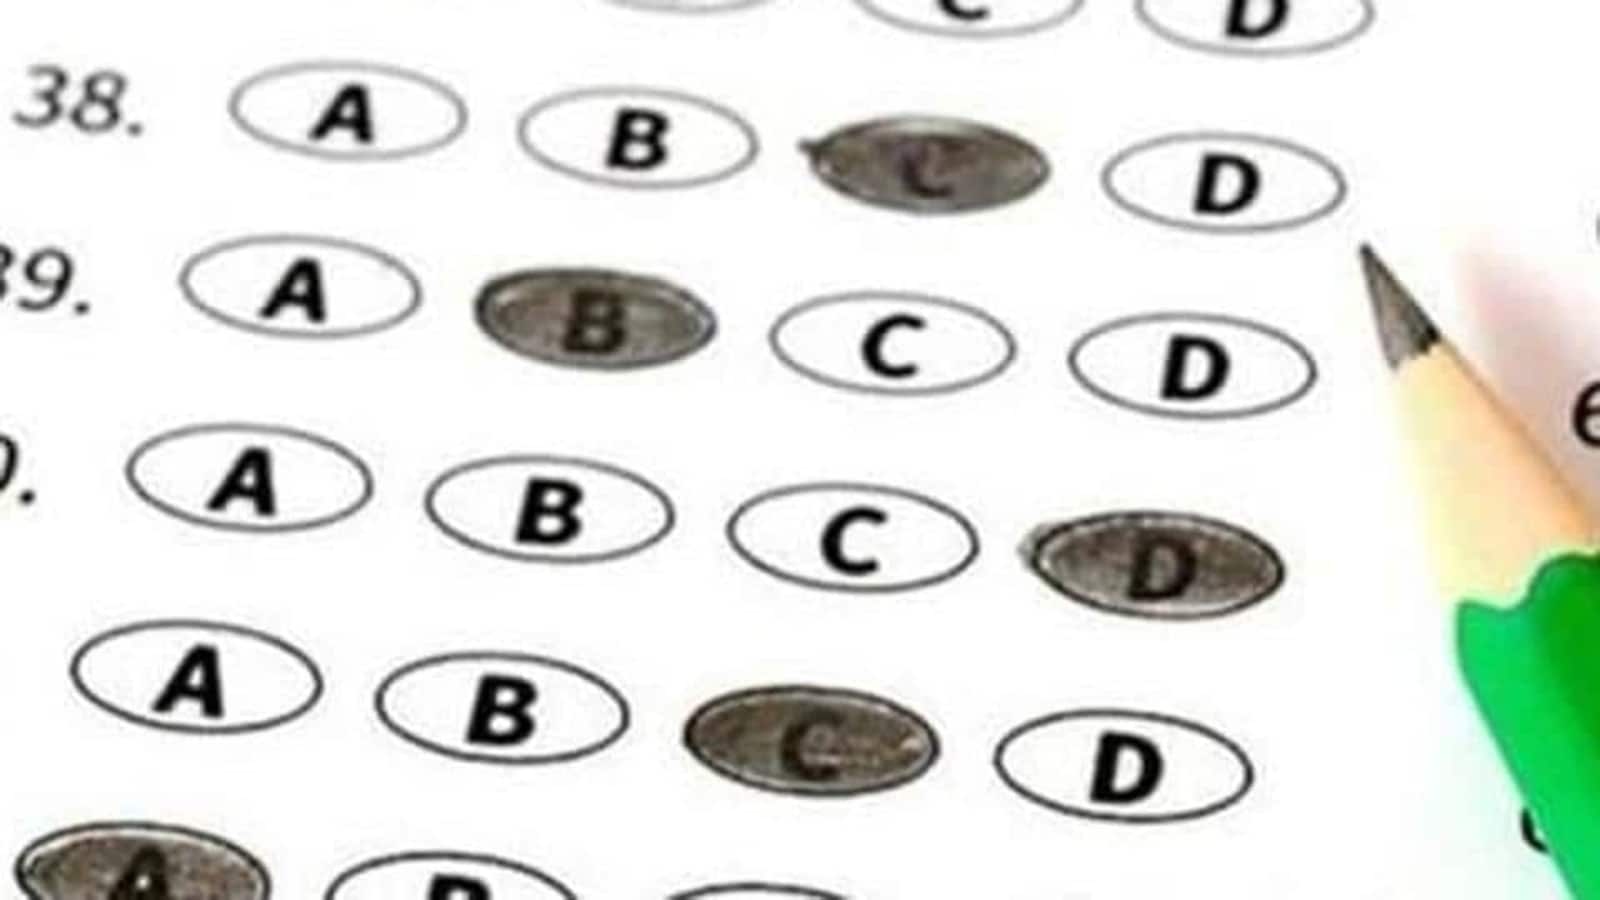 BPSC Assistant Professor answer key for 4 subjects released on bpsc.bih.nic.in